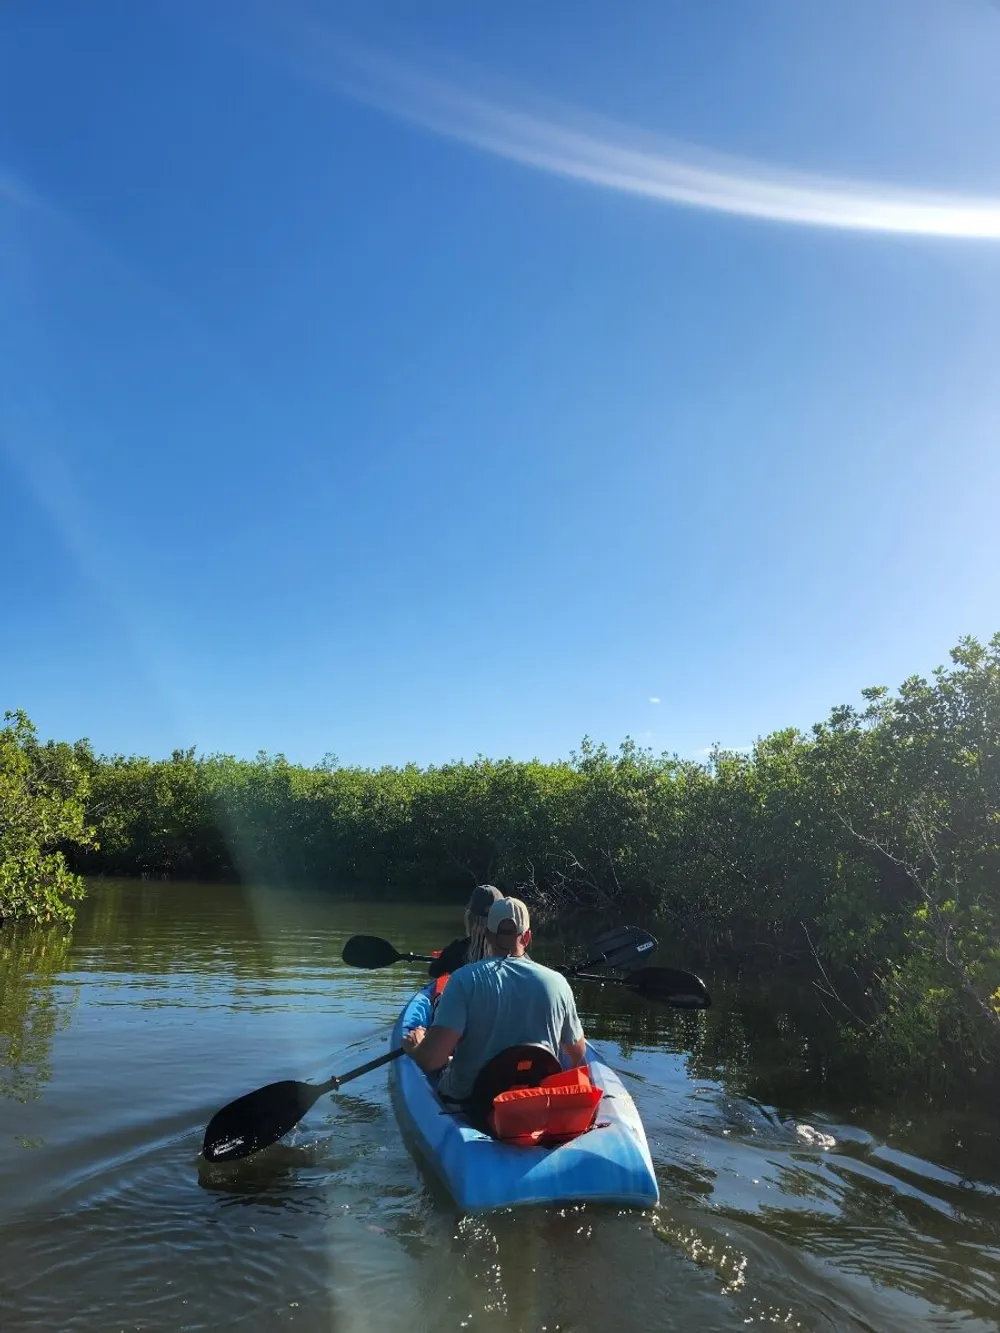 A person is kayaking through a calm waterway surrounded by greenery under a clear blue sky with sunlight creating a lens flare effect